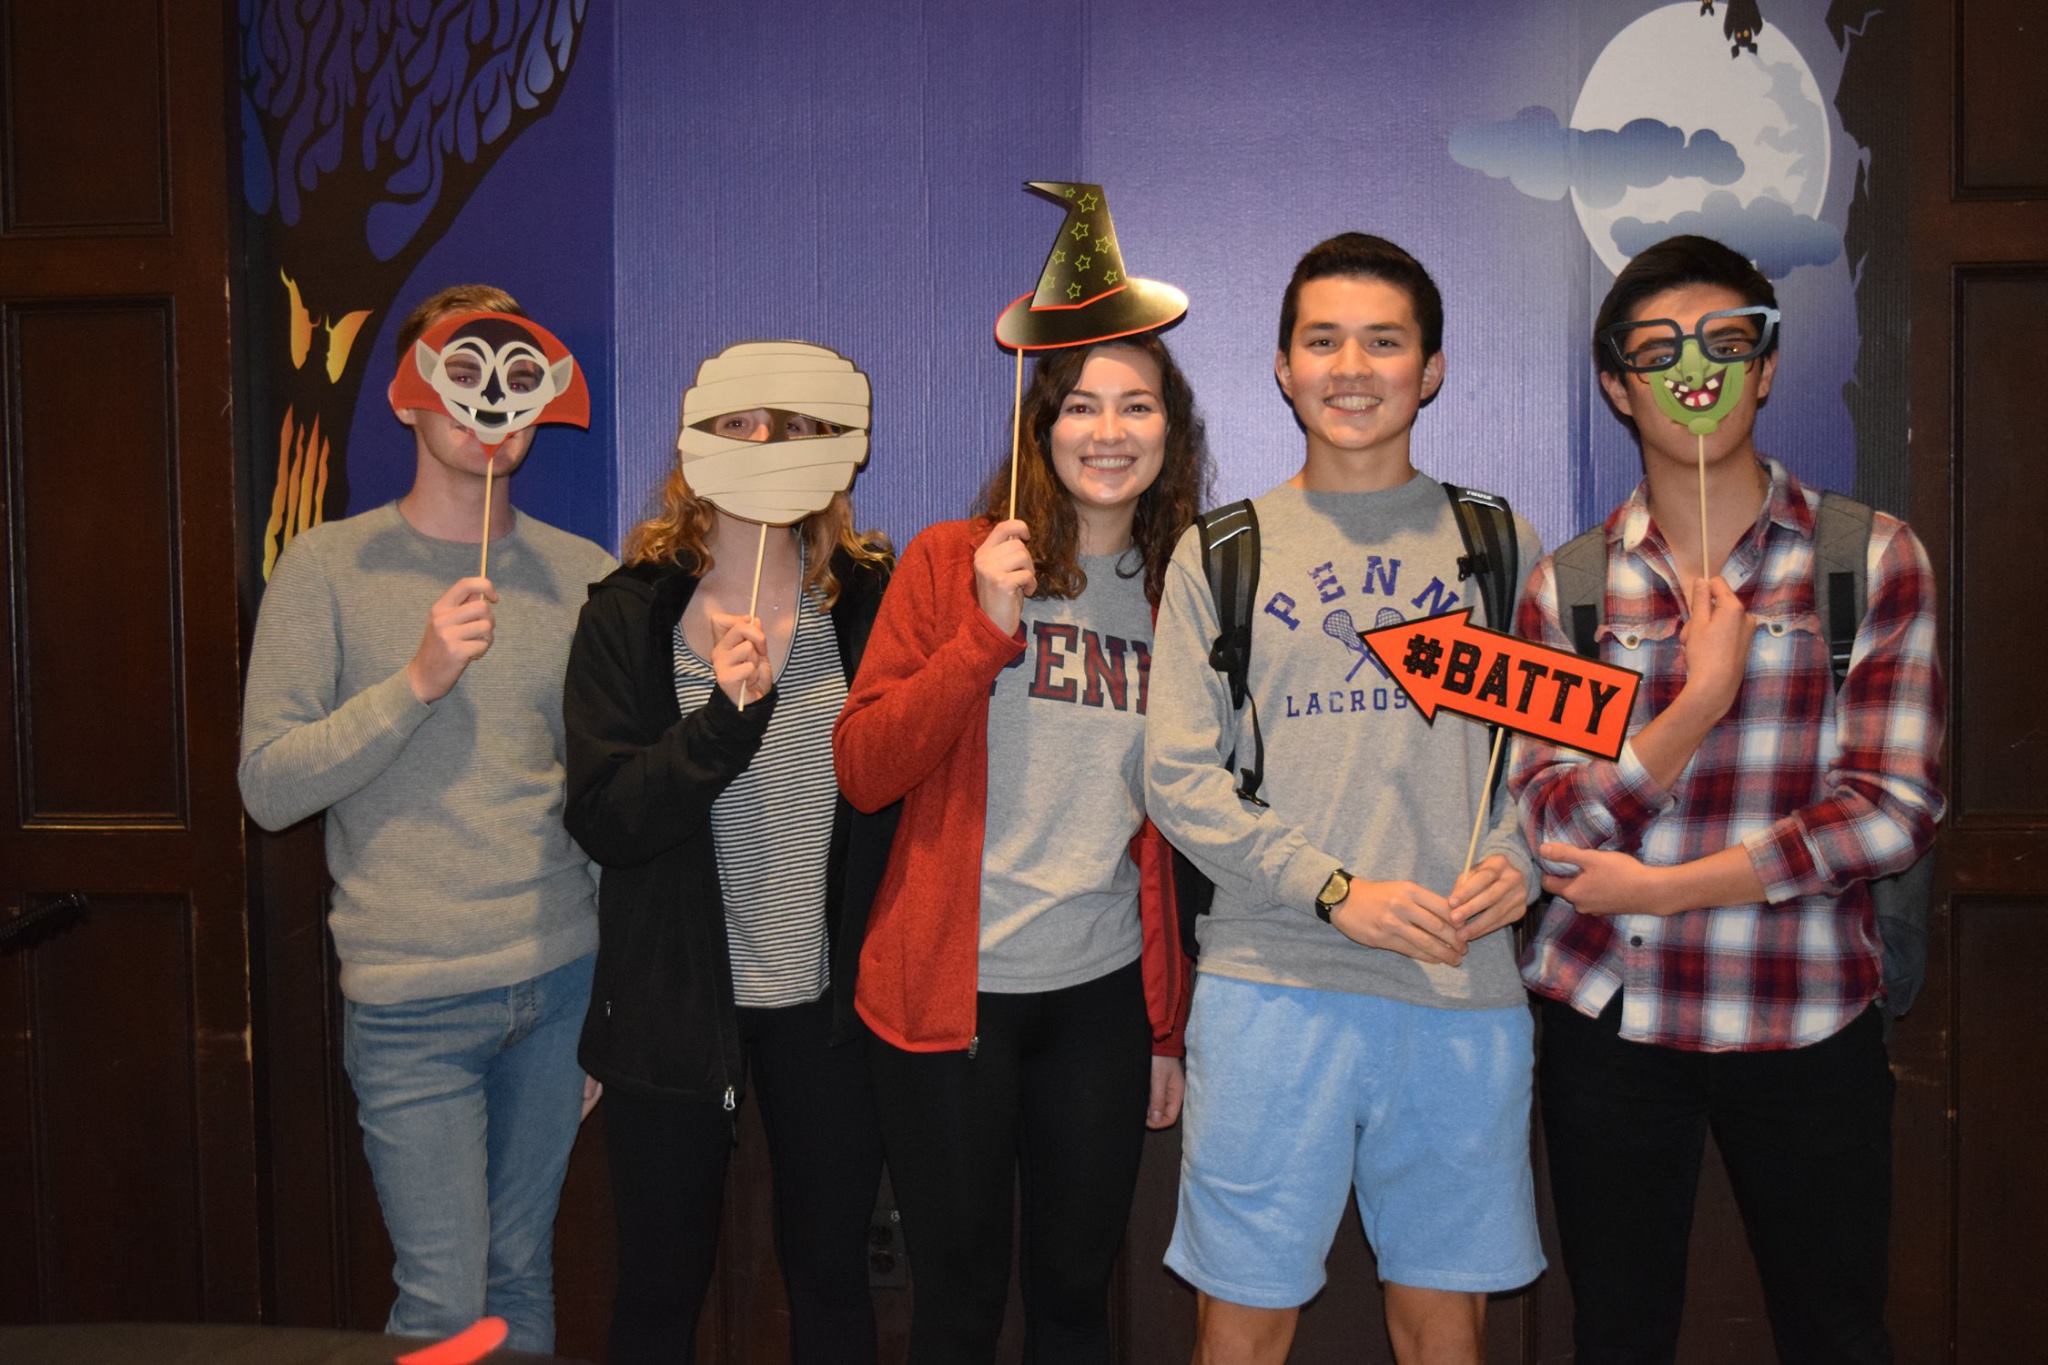 Penn Students pose with Halloween props in the Halloween themed photo booth